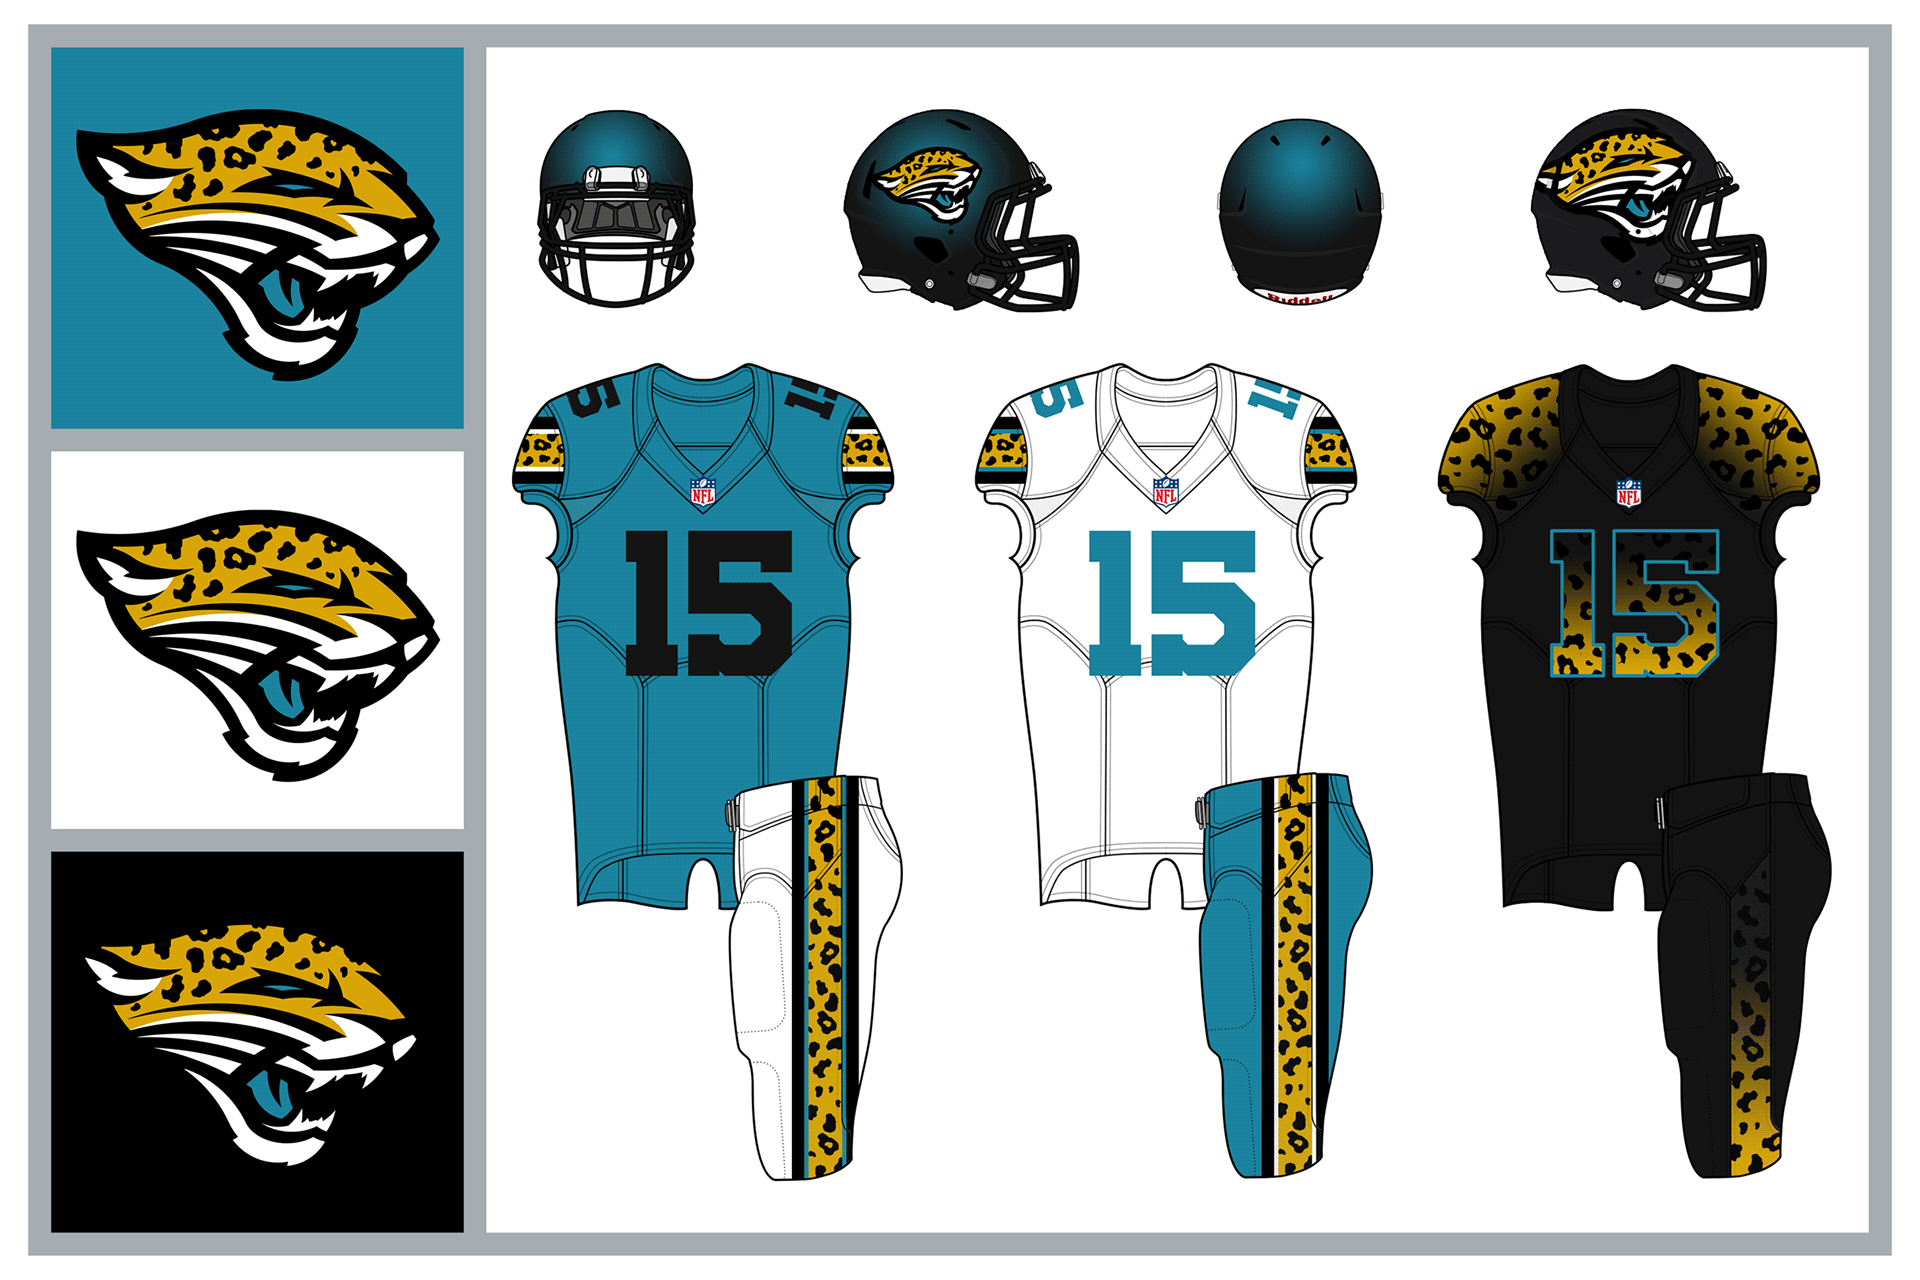 JACKSONVILLE JAGUARS: The Jags logo is a mix of old and new. The uniforms  get sublimated spots and a black & gold alternate.